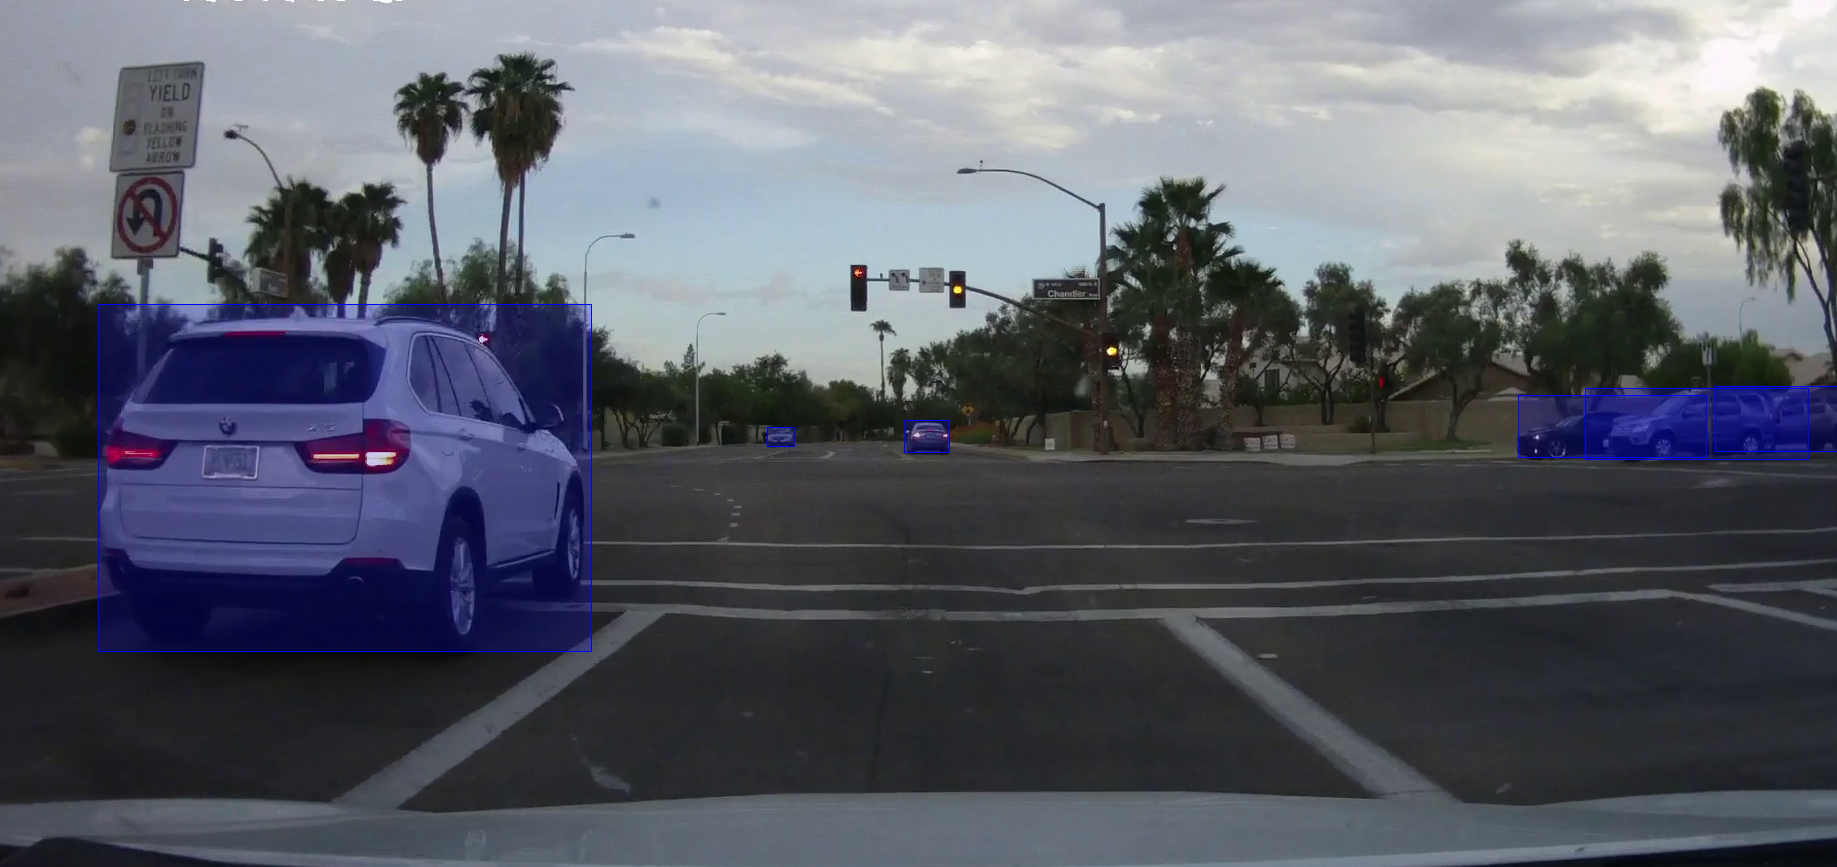 _images/vehicle-detection-adas-0002.png